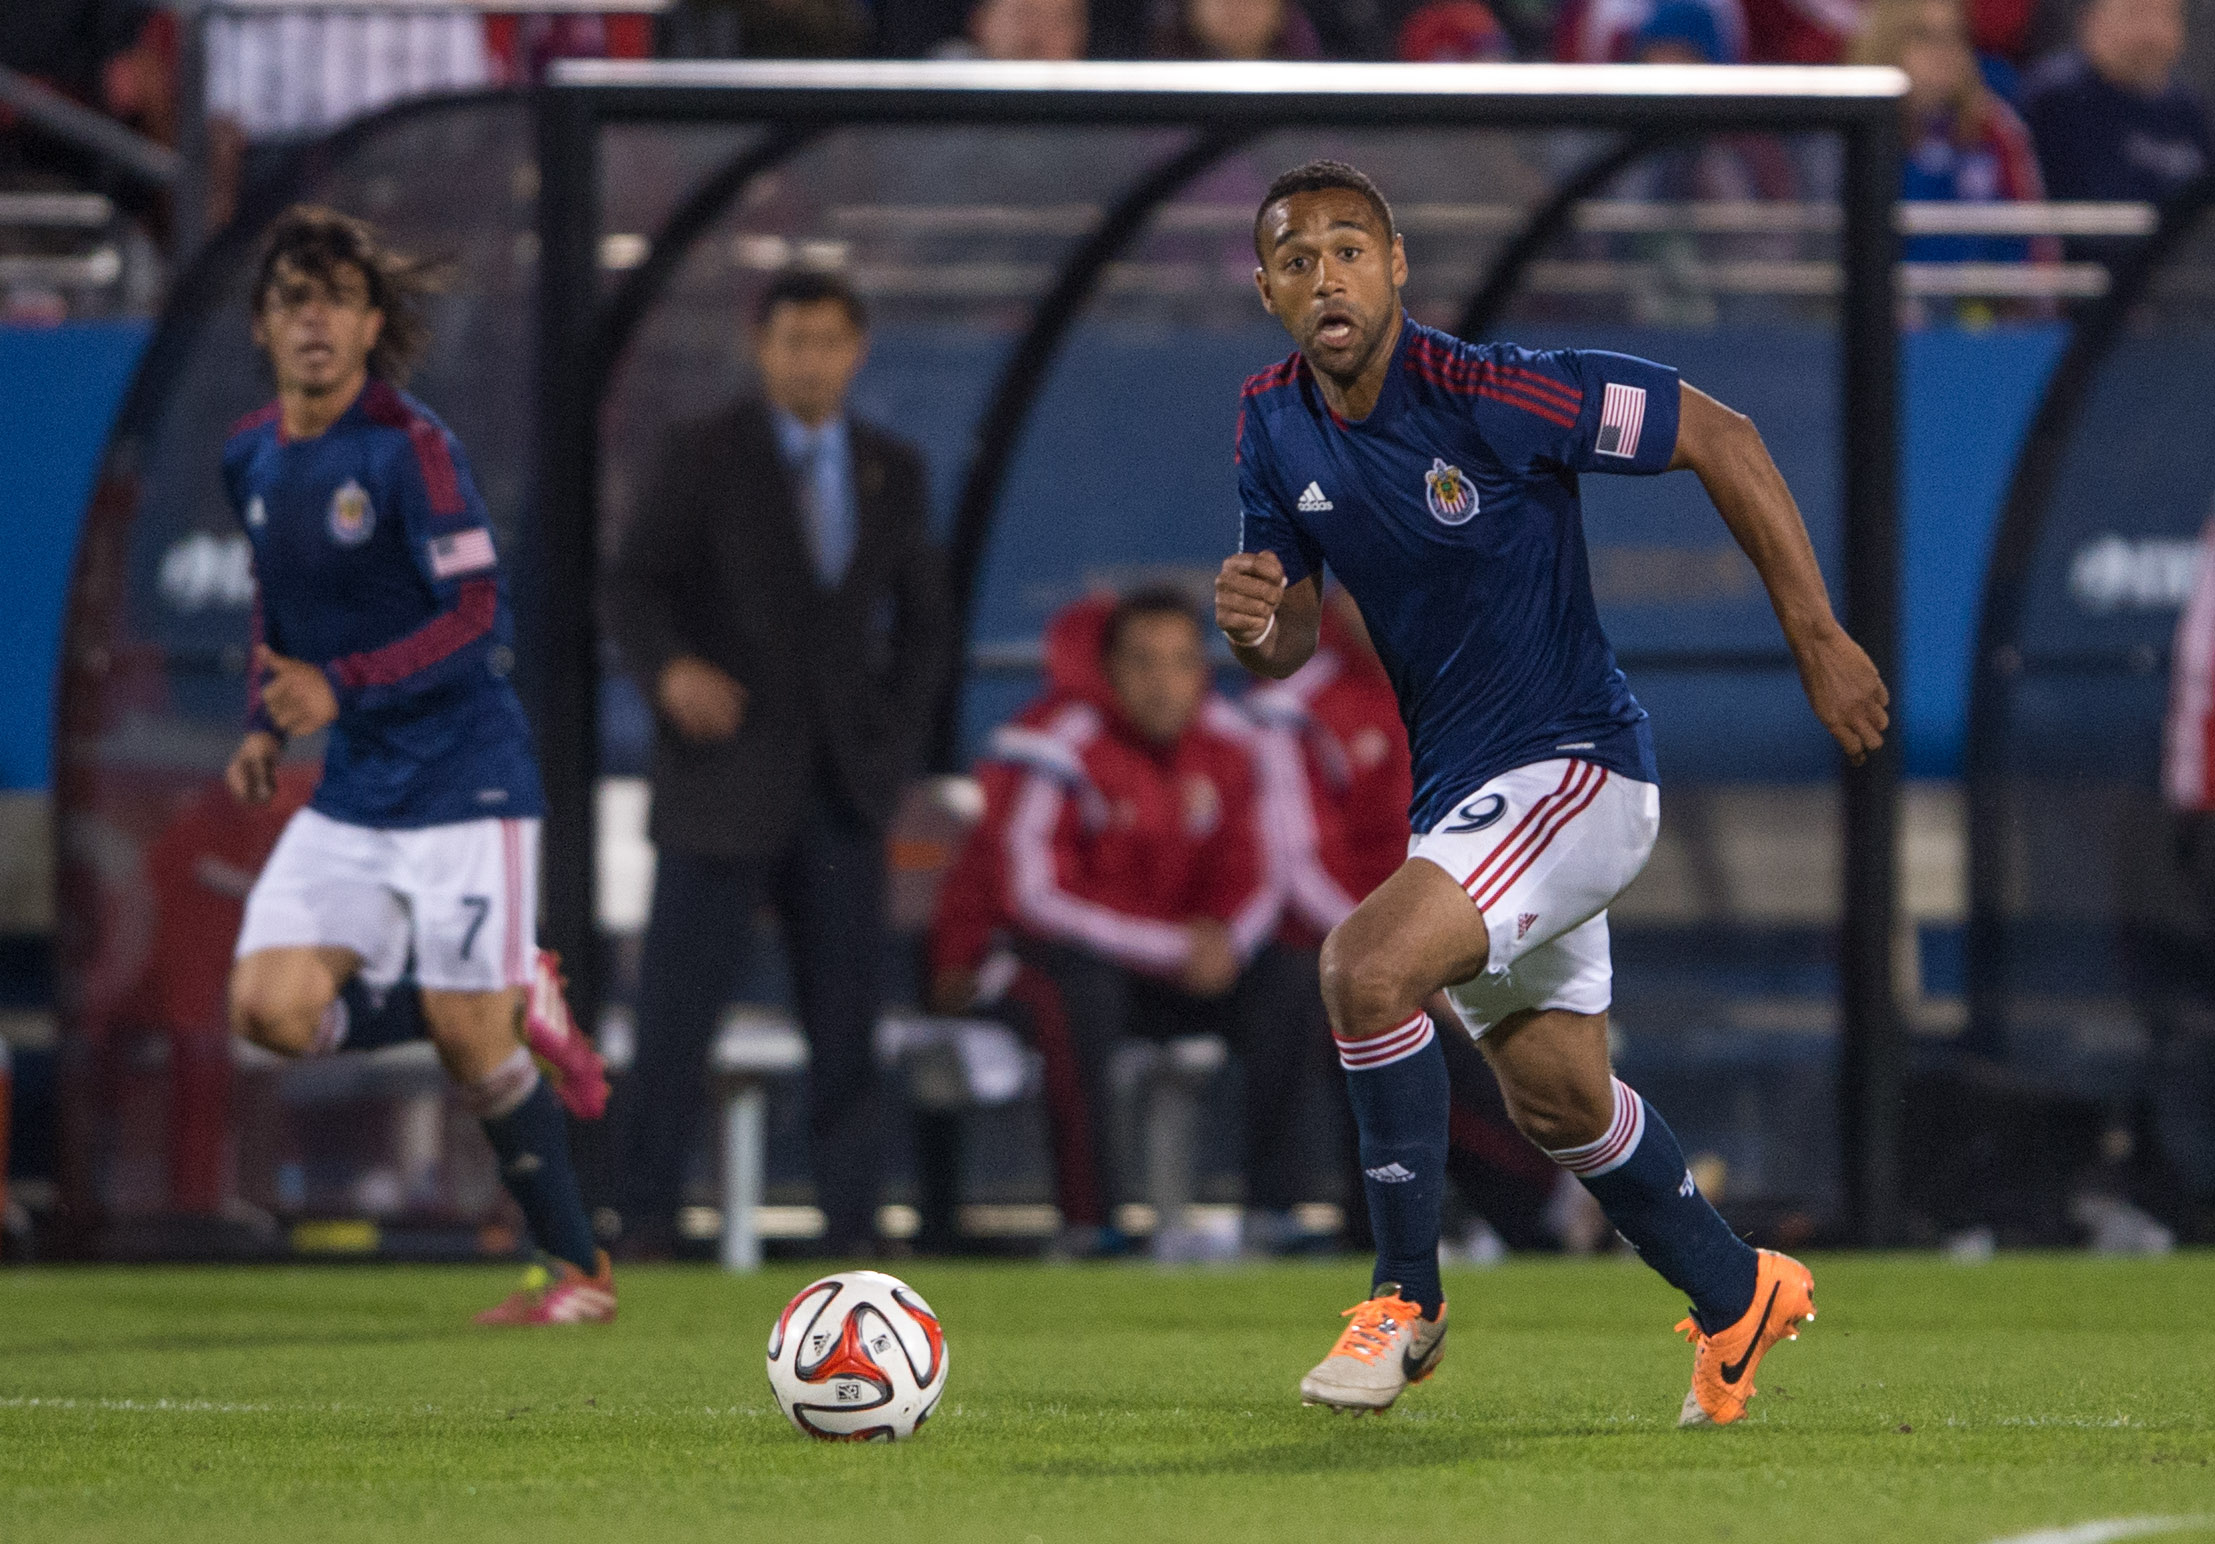 Moore in action for Chivas USA.